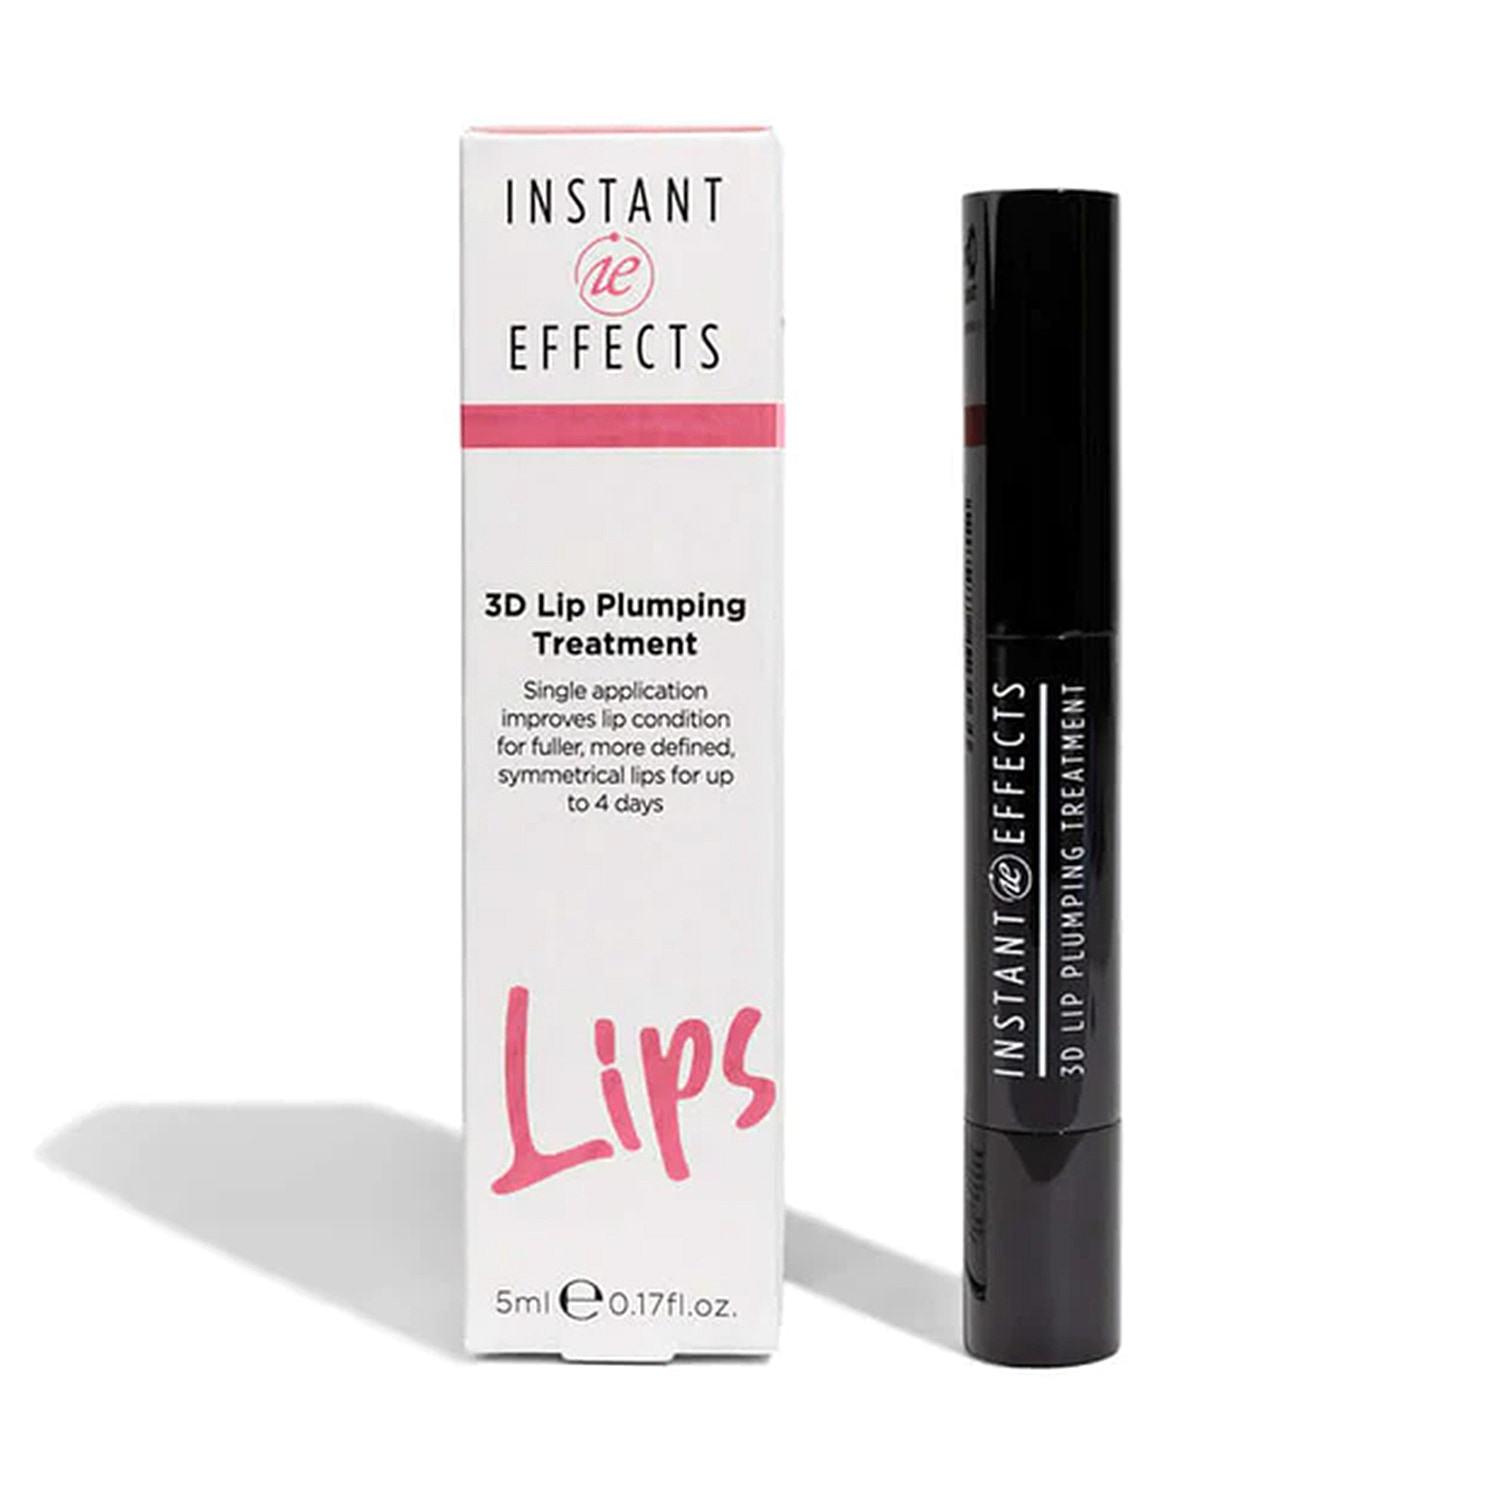 Instant Effects- 3D Lip Plumping Treatment - 5ml